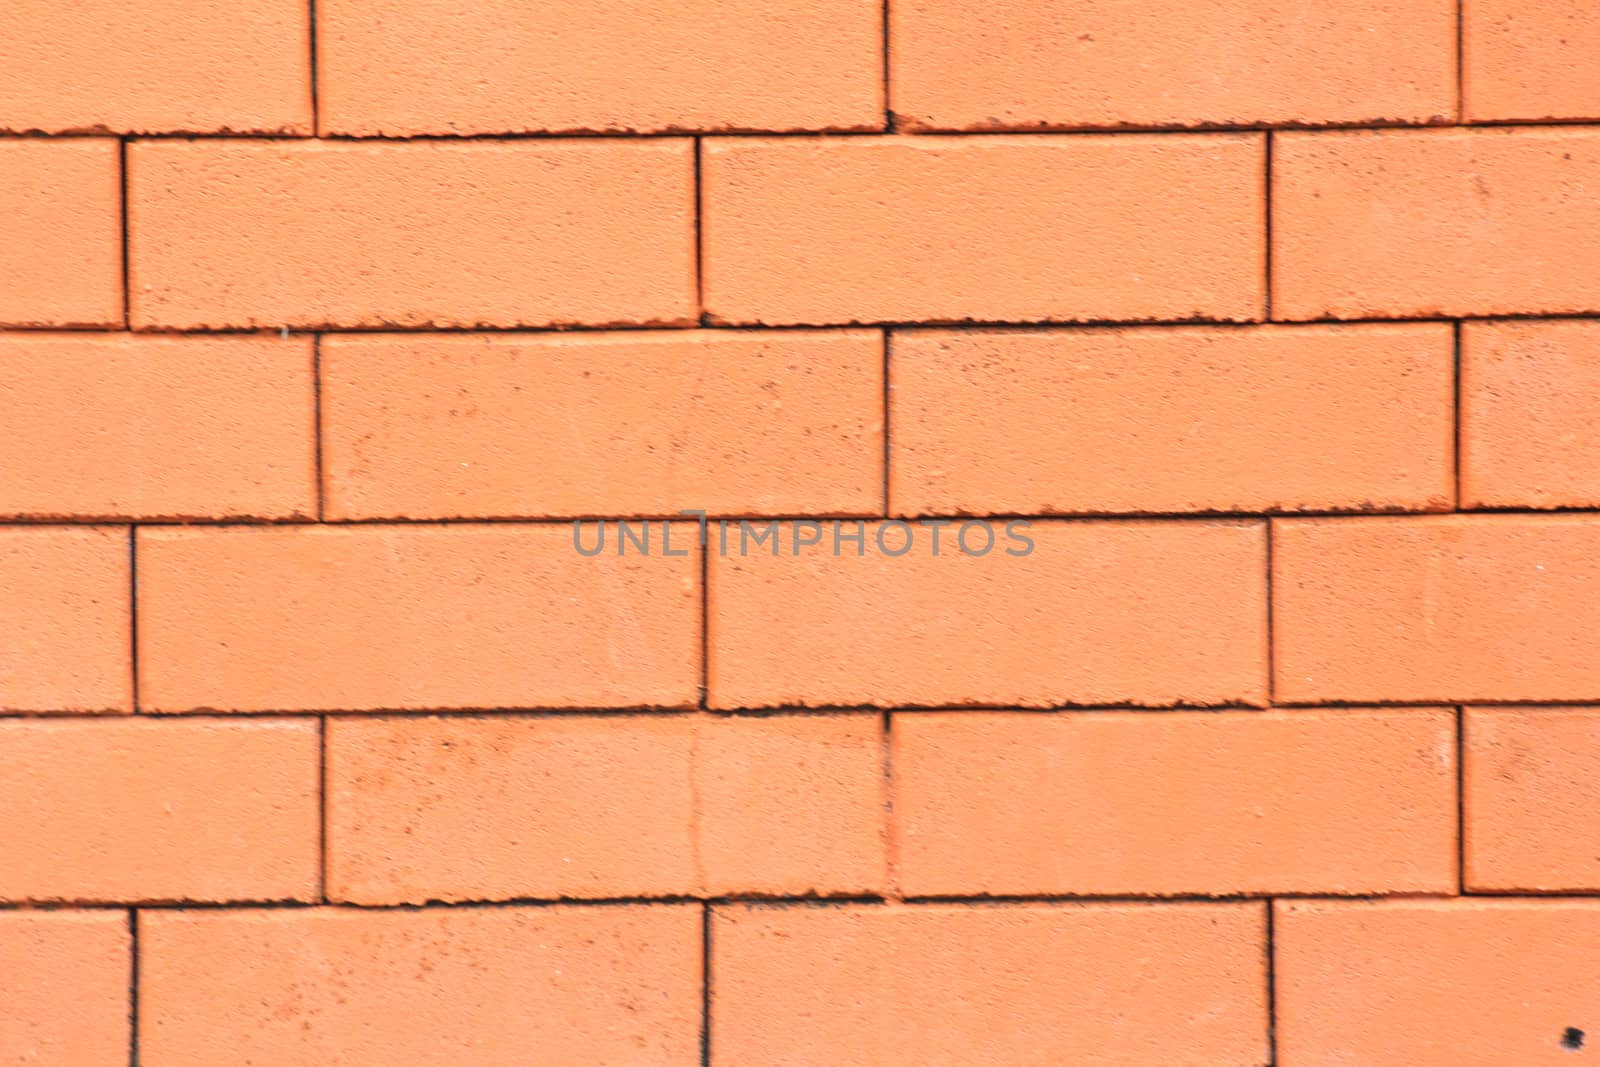 There is the brick wall have colour of orange.